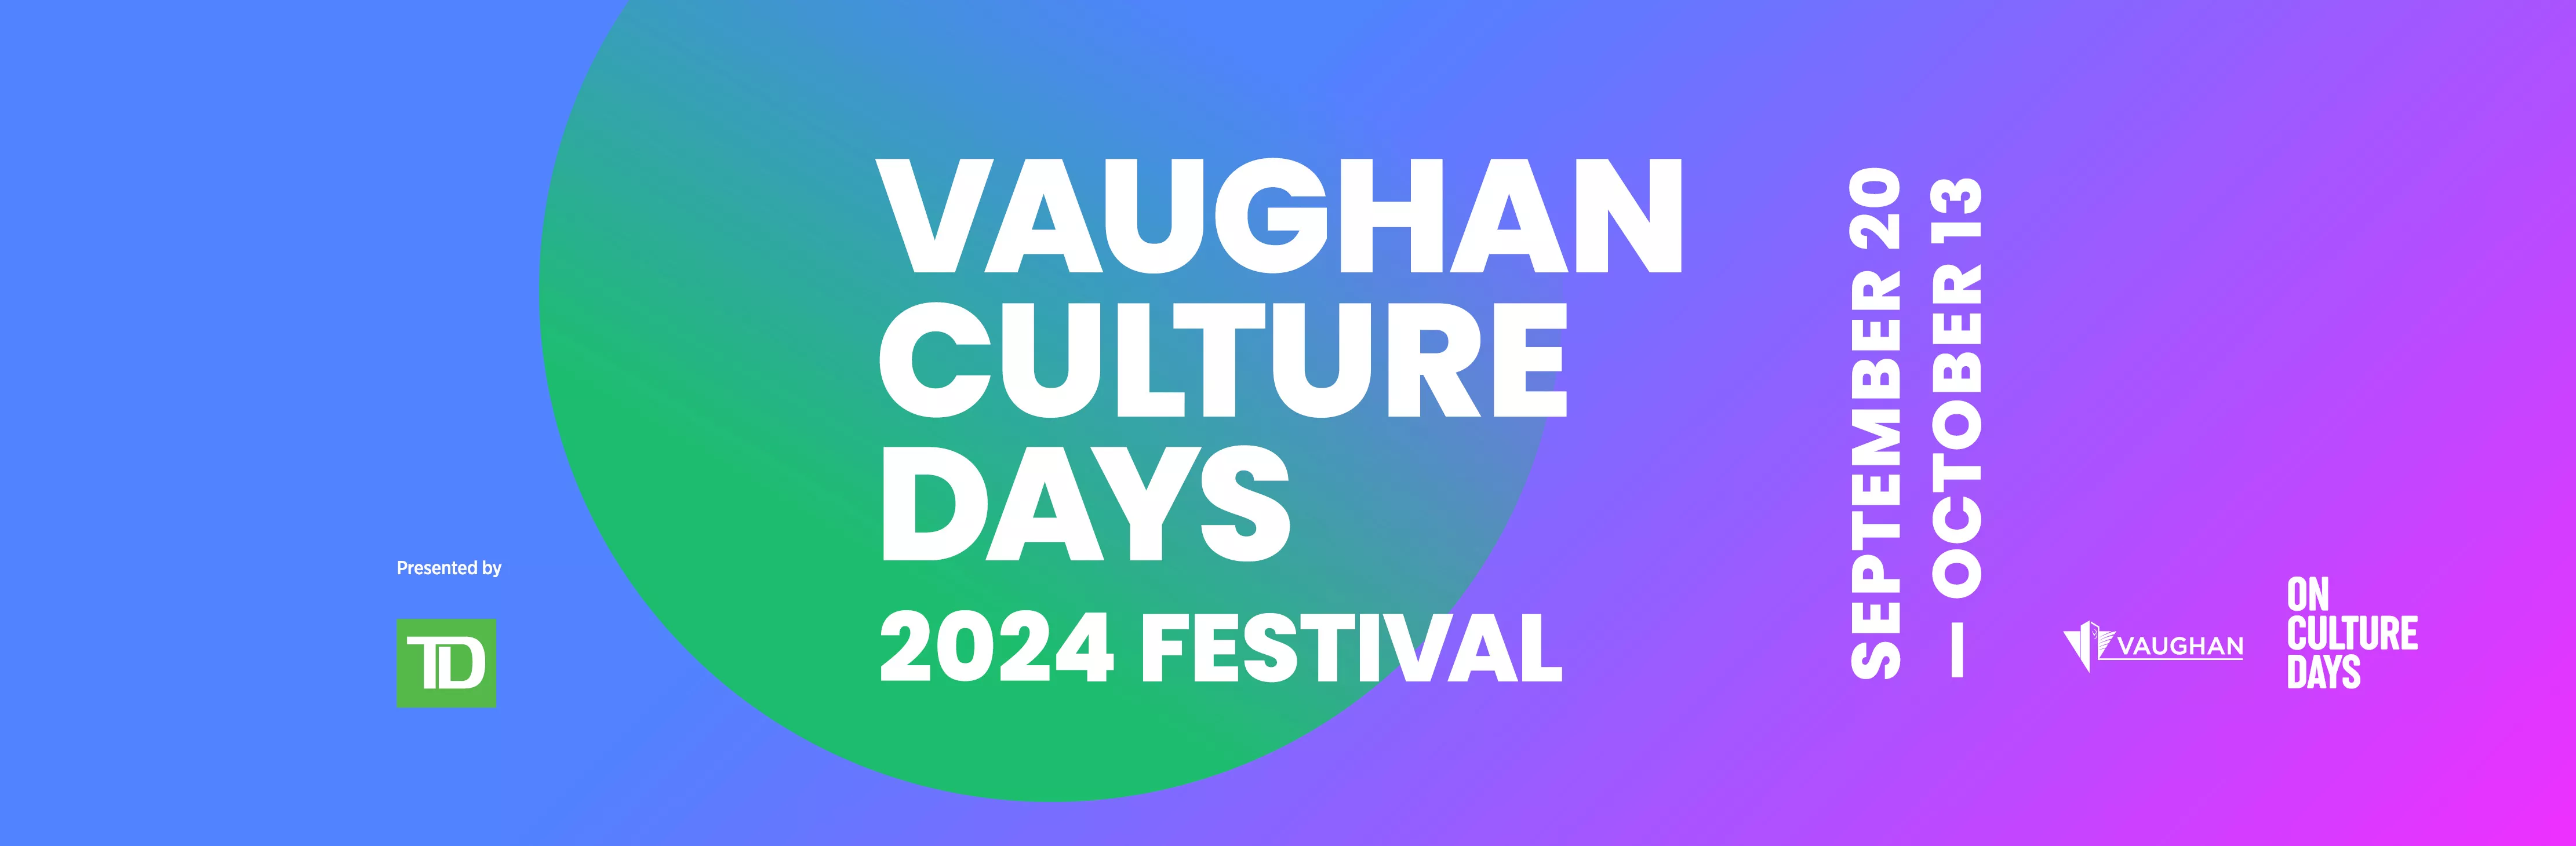 Web banner states Vaughan Culture Days 2024 Festival, September 20 to October 13, and includes City of Vaughan, Ontario Culture Days and TD logos